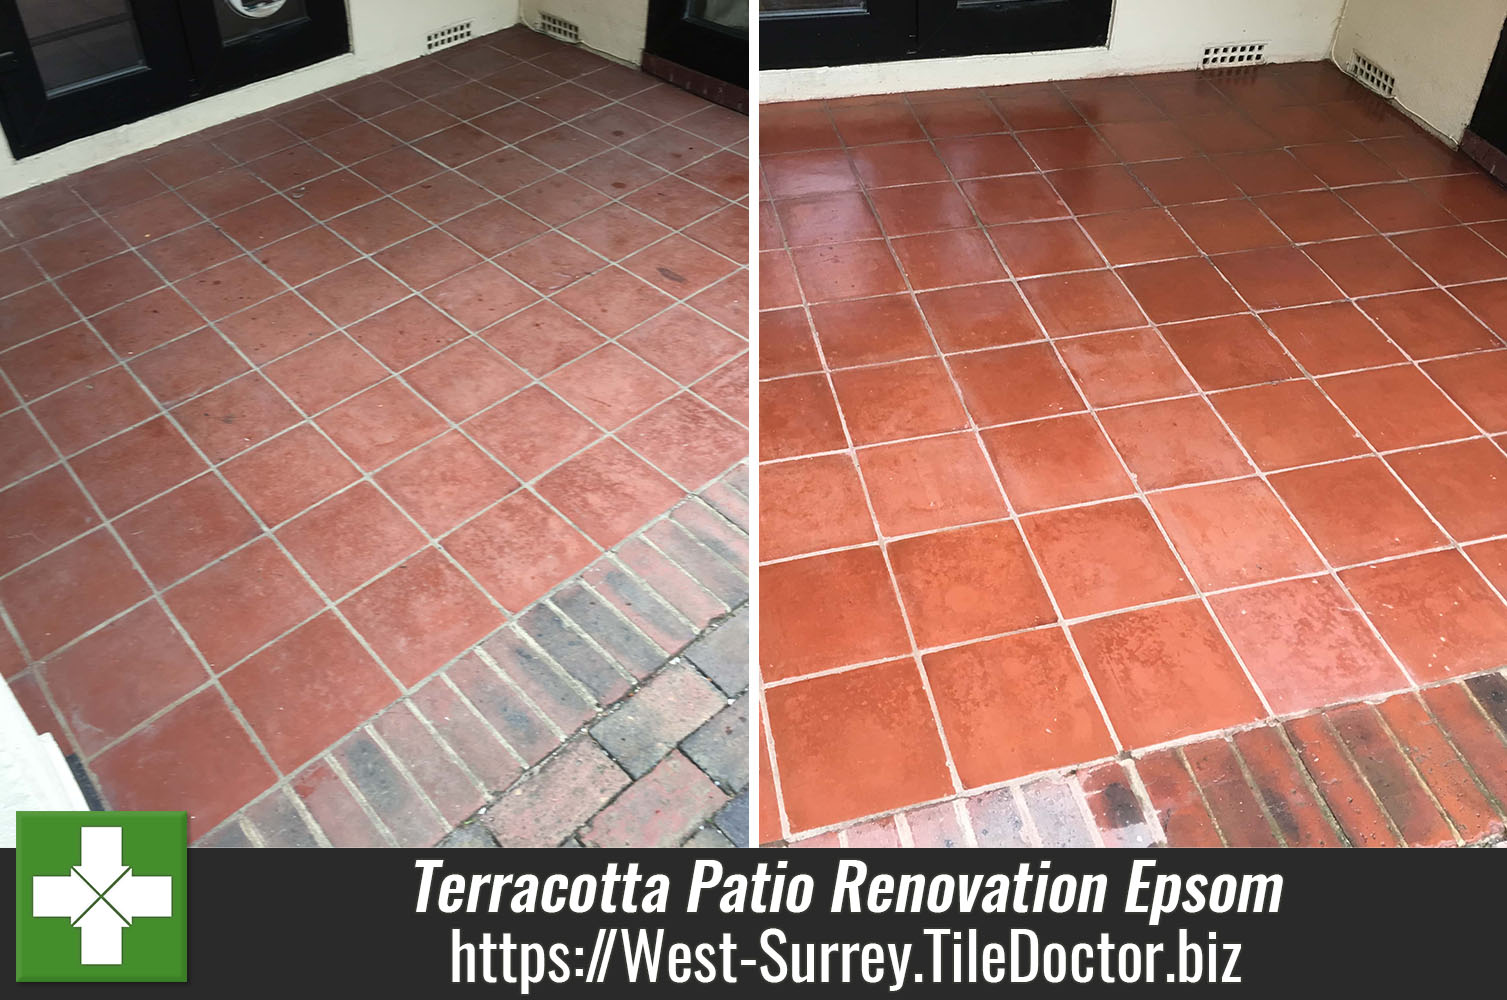 Terracotta Patio Floor Before and After Renovation Epsom